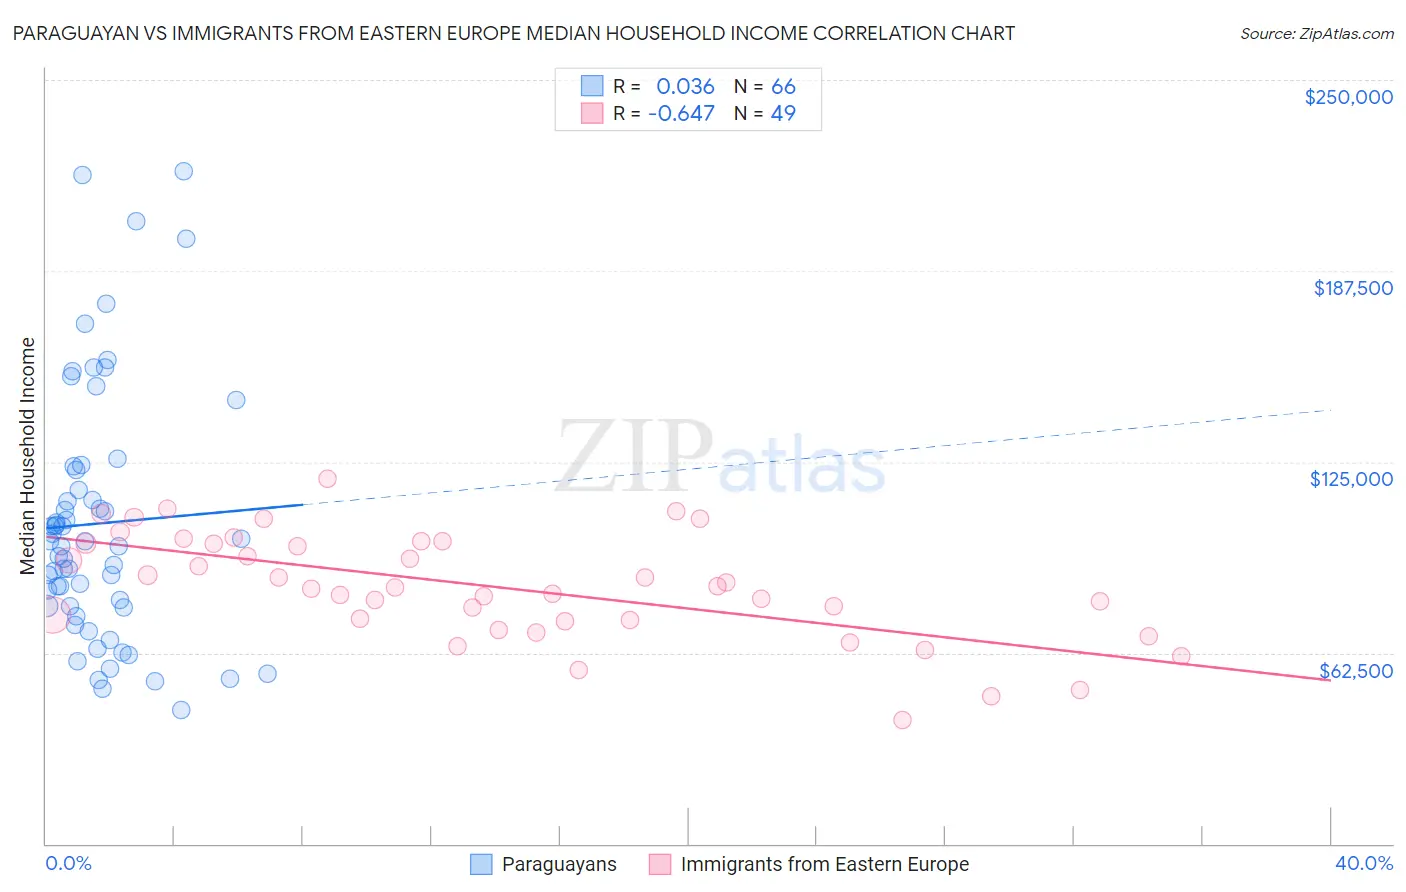 Paraguayan vs Immigrants from Eastern Europe Median Household Income